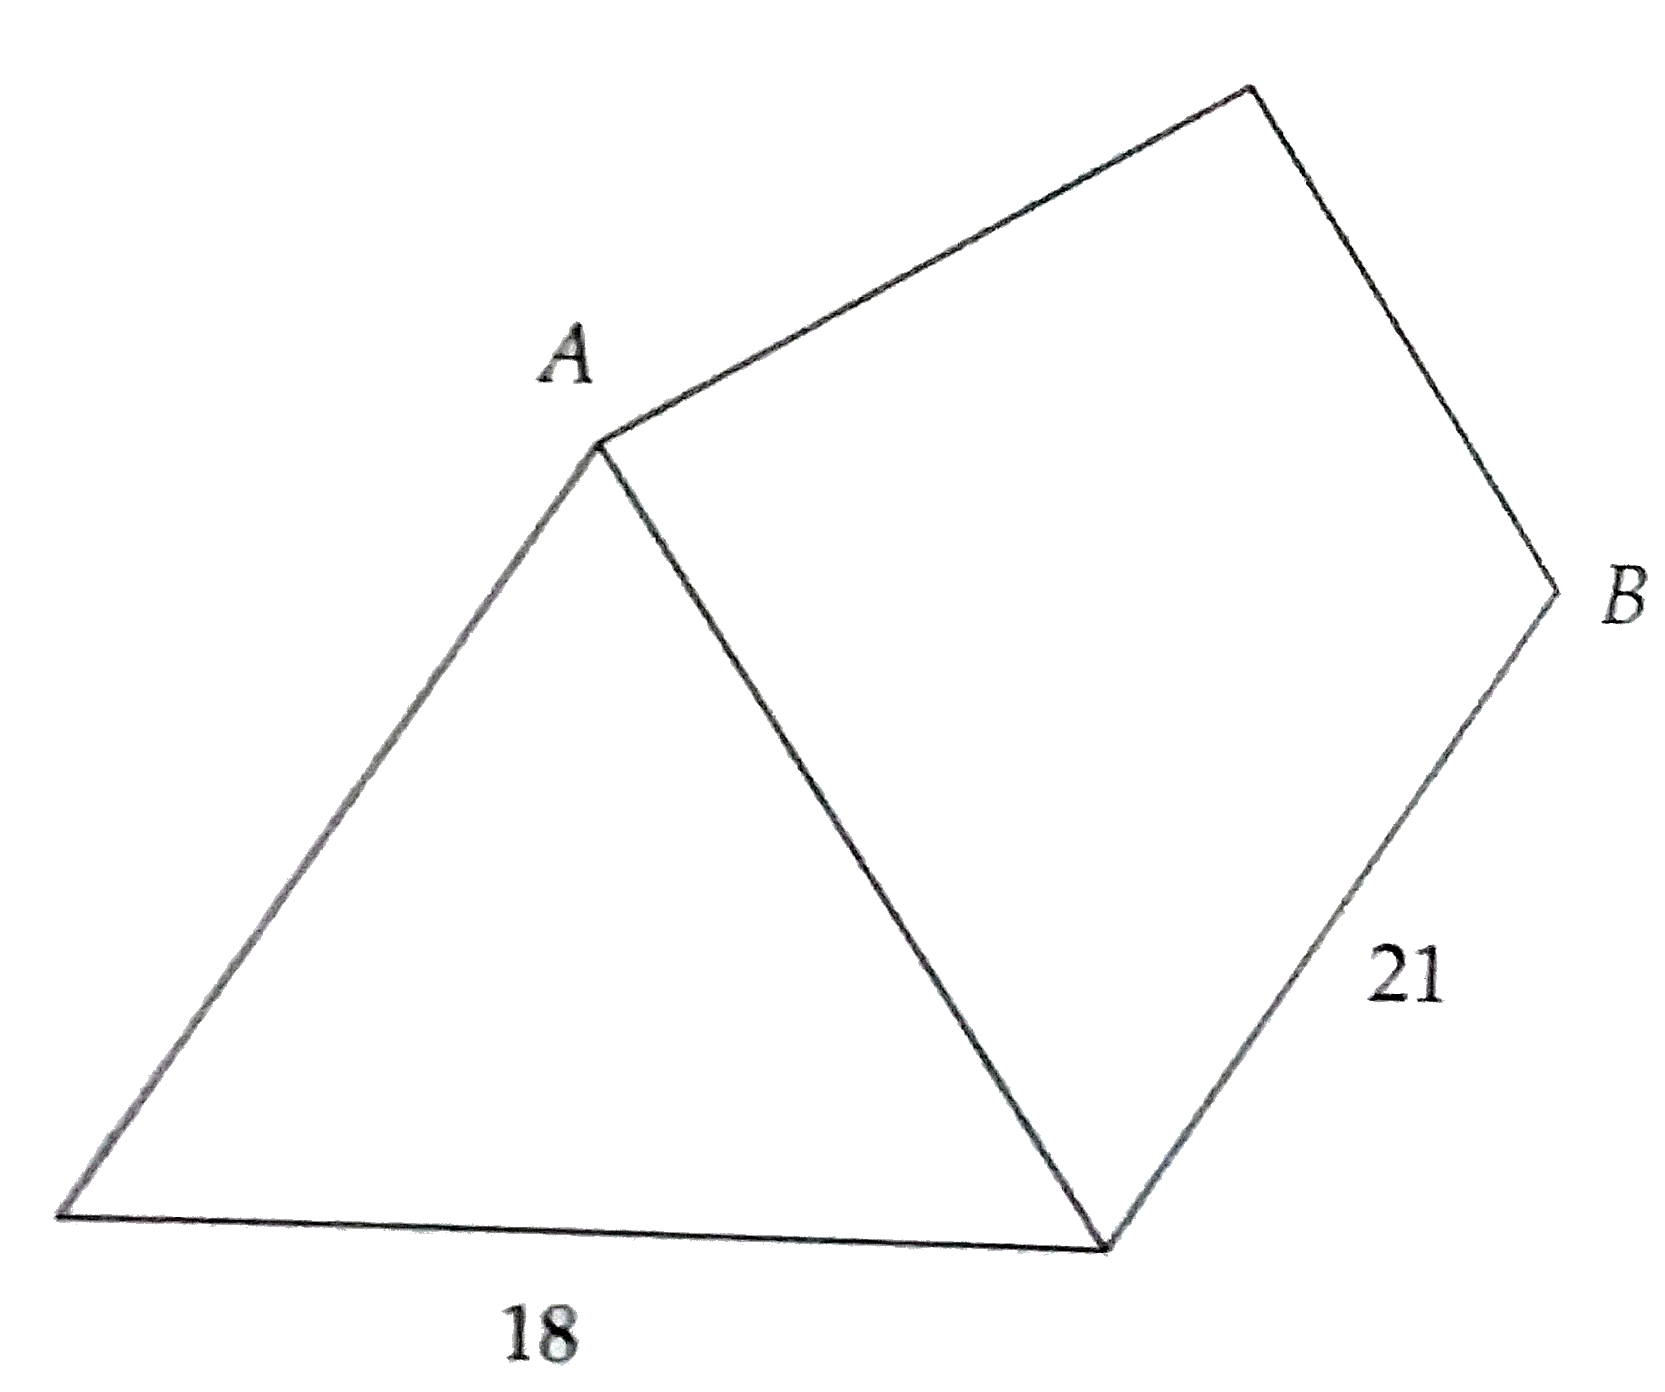 In the triangle solid shown in Figure points A and B are vertices. The triangular faces are isosceles. The solid has a height of 12, a length of 21, and a width of 18. What is the distance between A and B ?